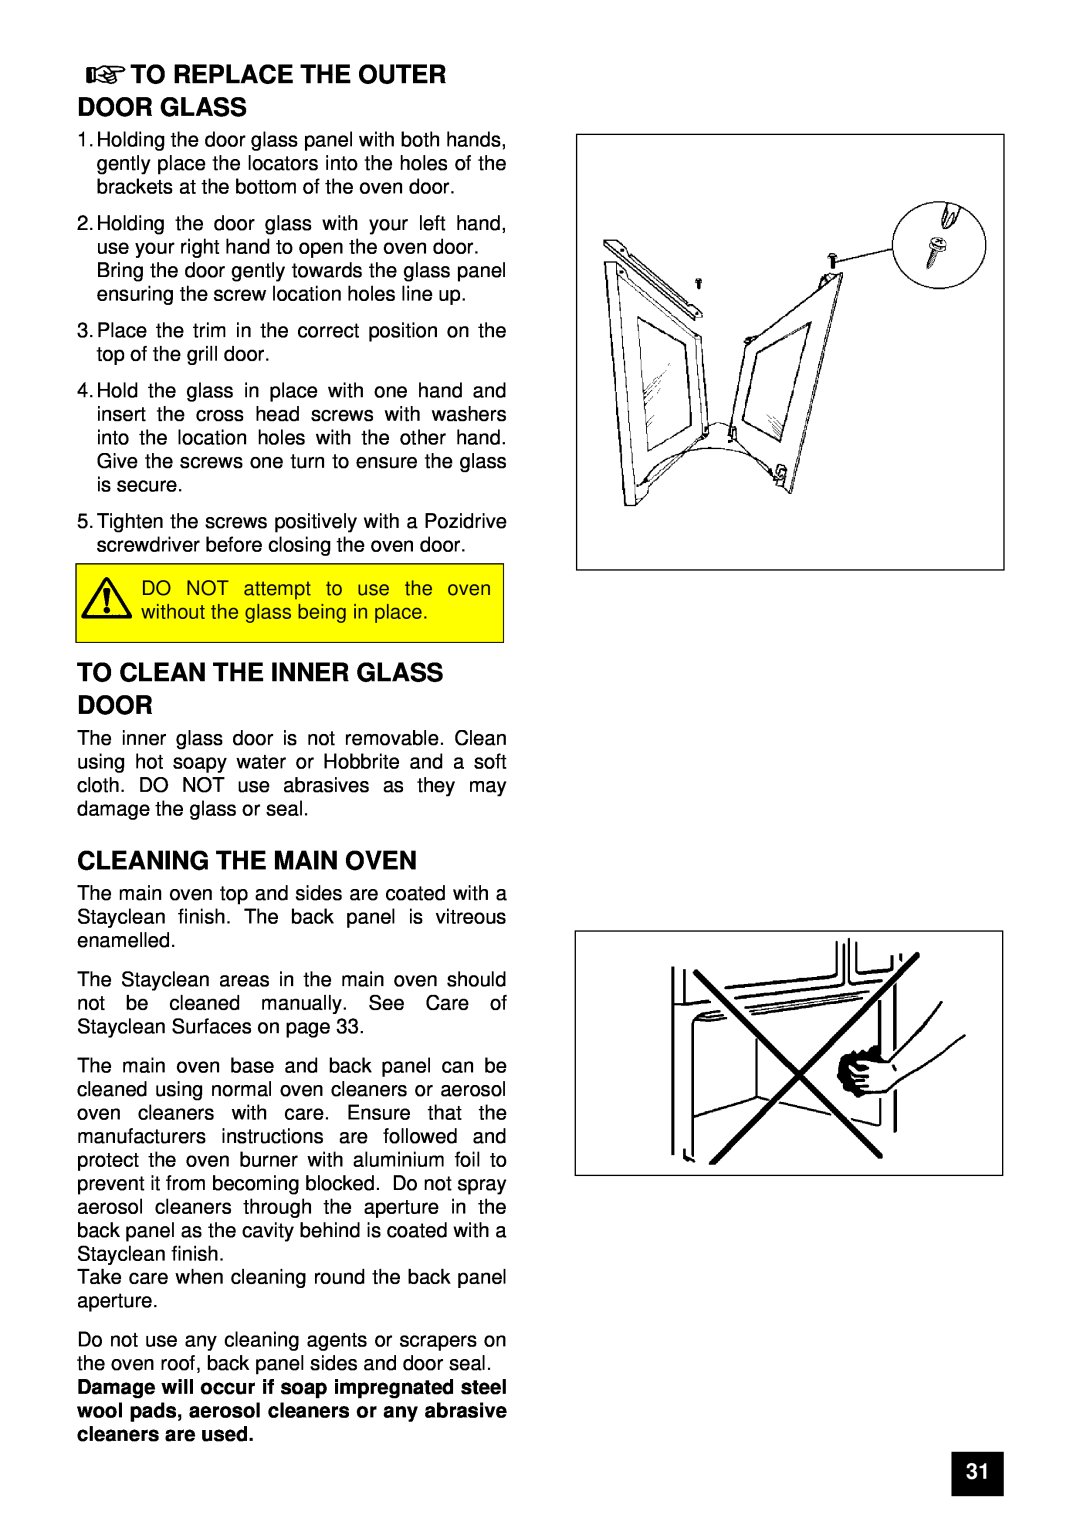 Zanussi ZUG 78 manual To Replace The Outer Door Glass, To Clean The Inner Glass Door, Cleaning The Main Oven 